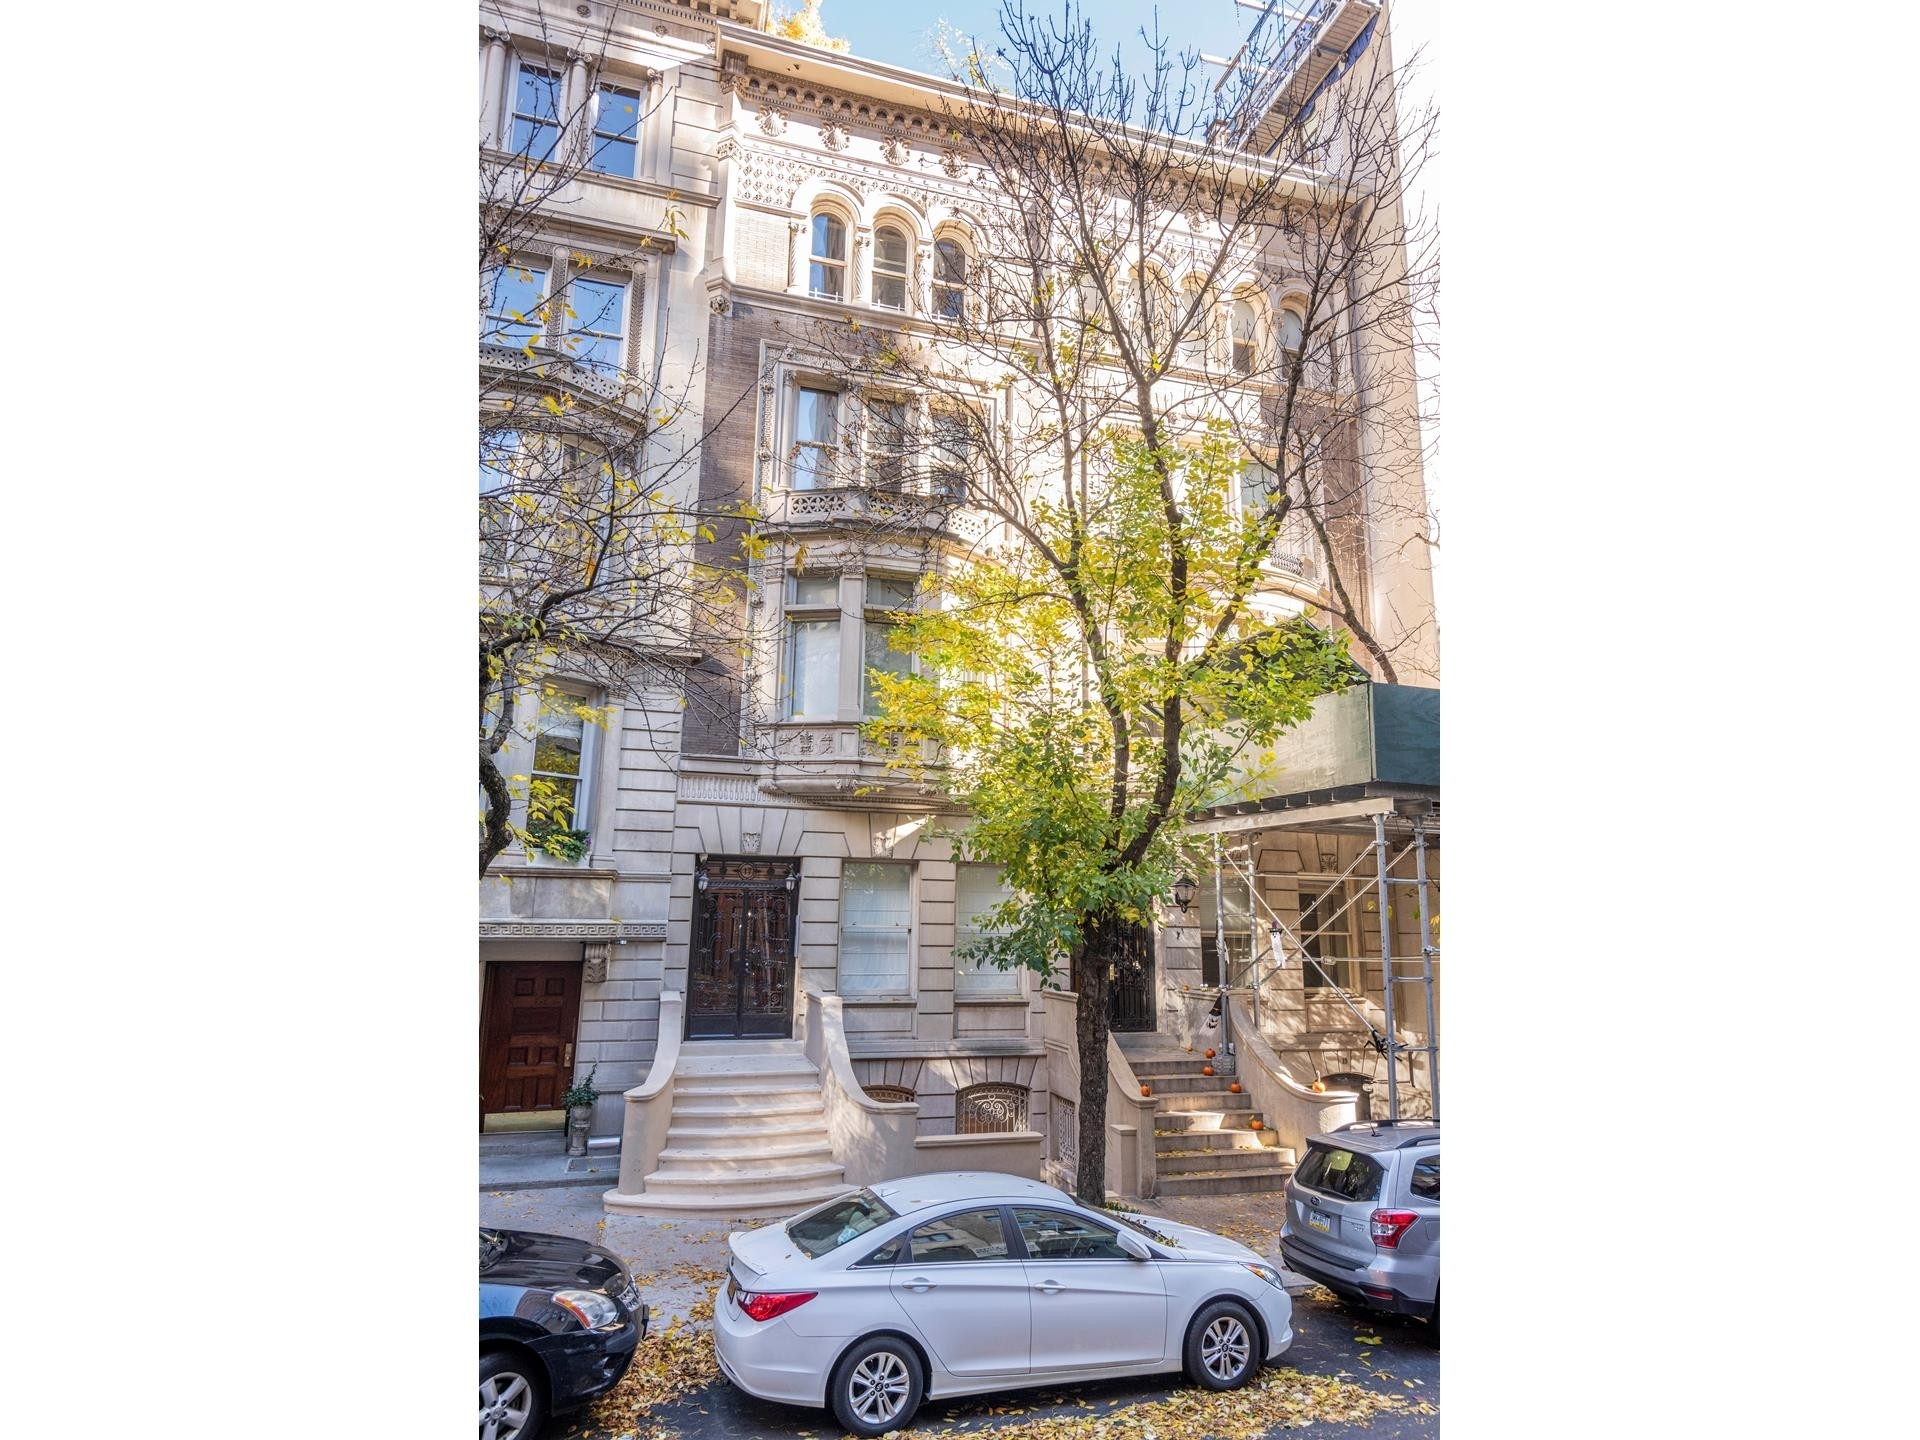 Multi Family Townhouse for Sale at 17 E 76TH ST, TOWNHOUSE Lenox Hill, New York, NY 10021